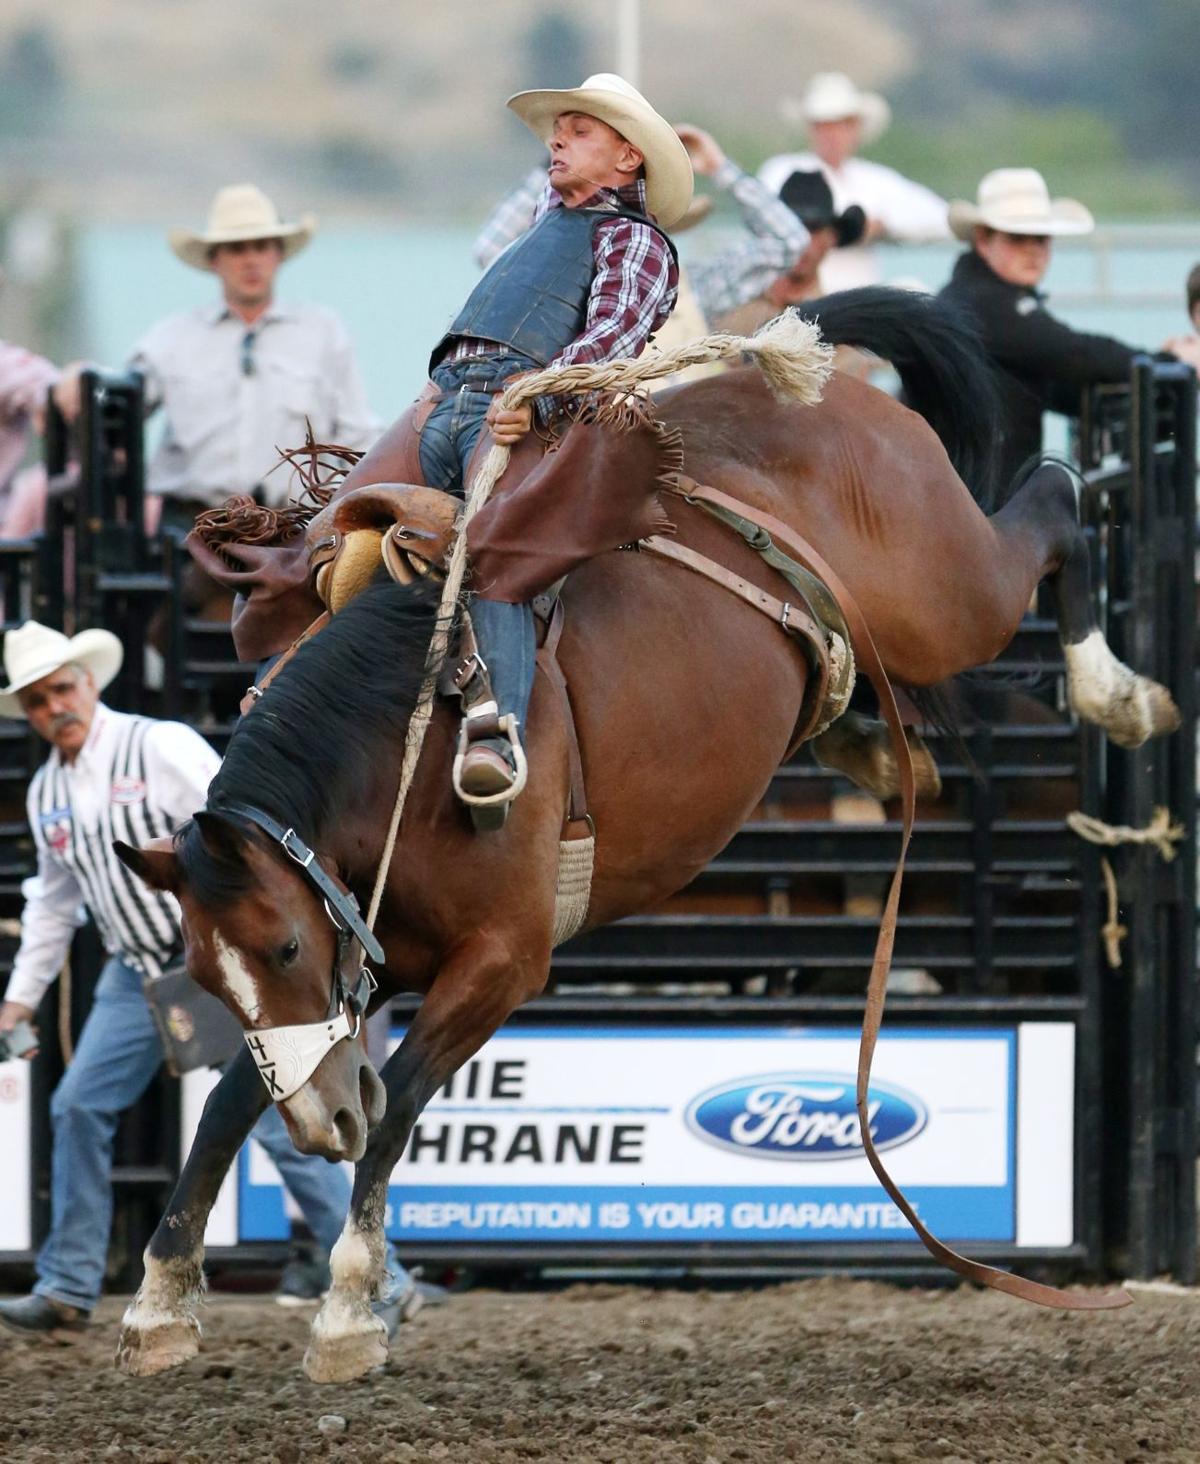 Yellowstone River Roundup wraps up 3 days of MontanaFair rodeo | Rodeo ...